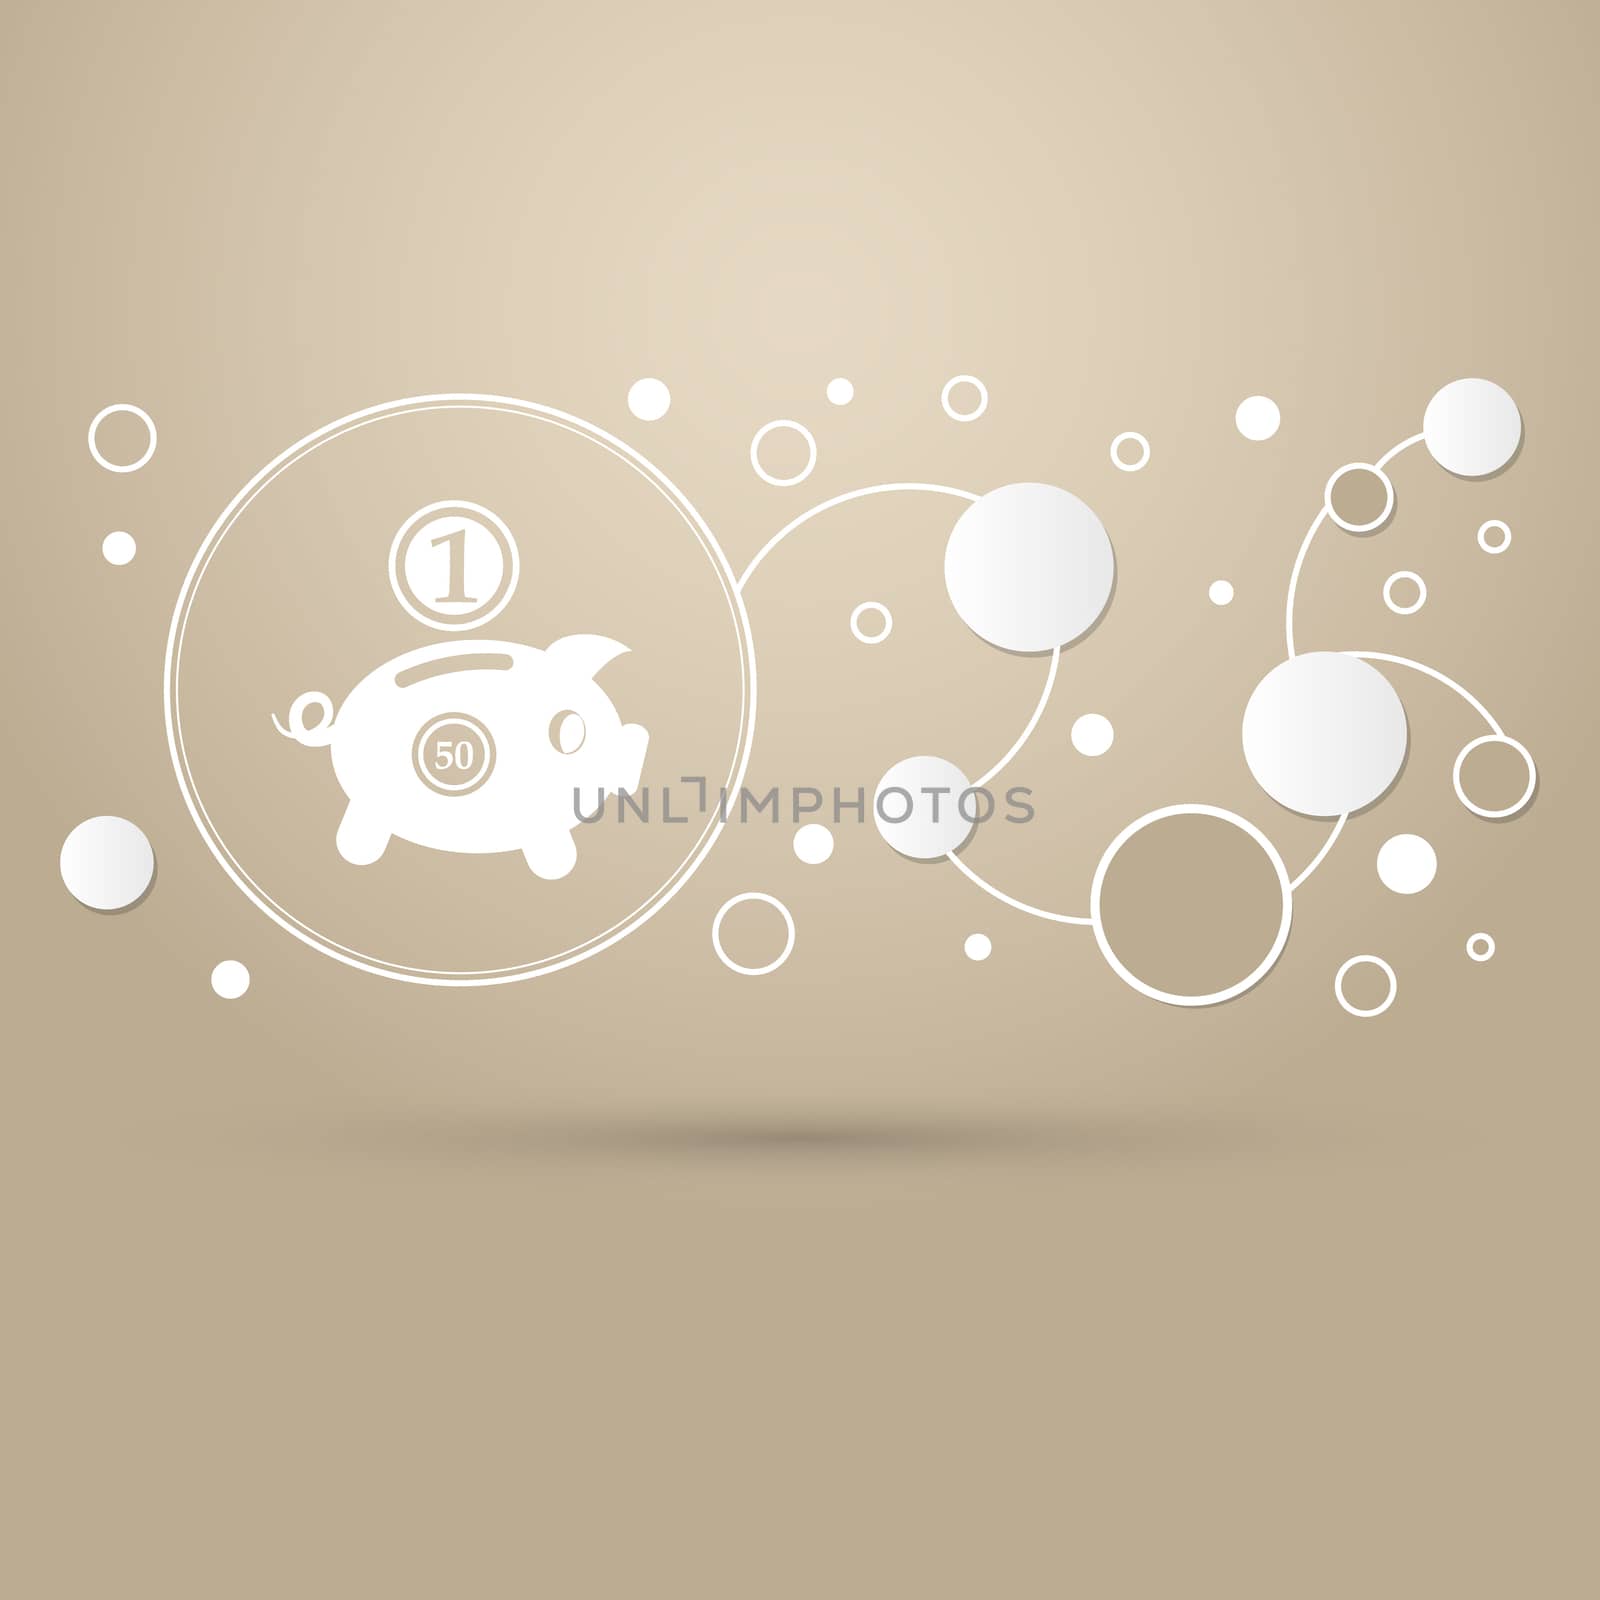 Piggy bank and dollar coin icon on a brown background with elegant style and modern design infographic.  by Adamchuk